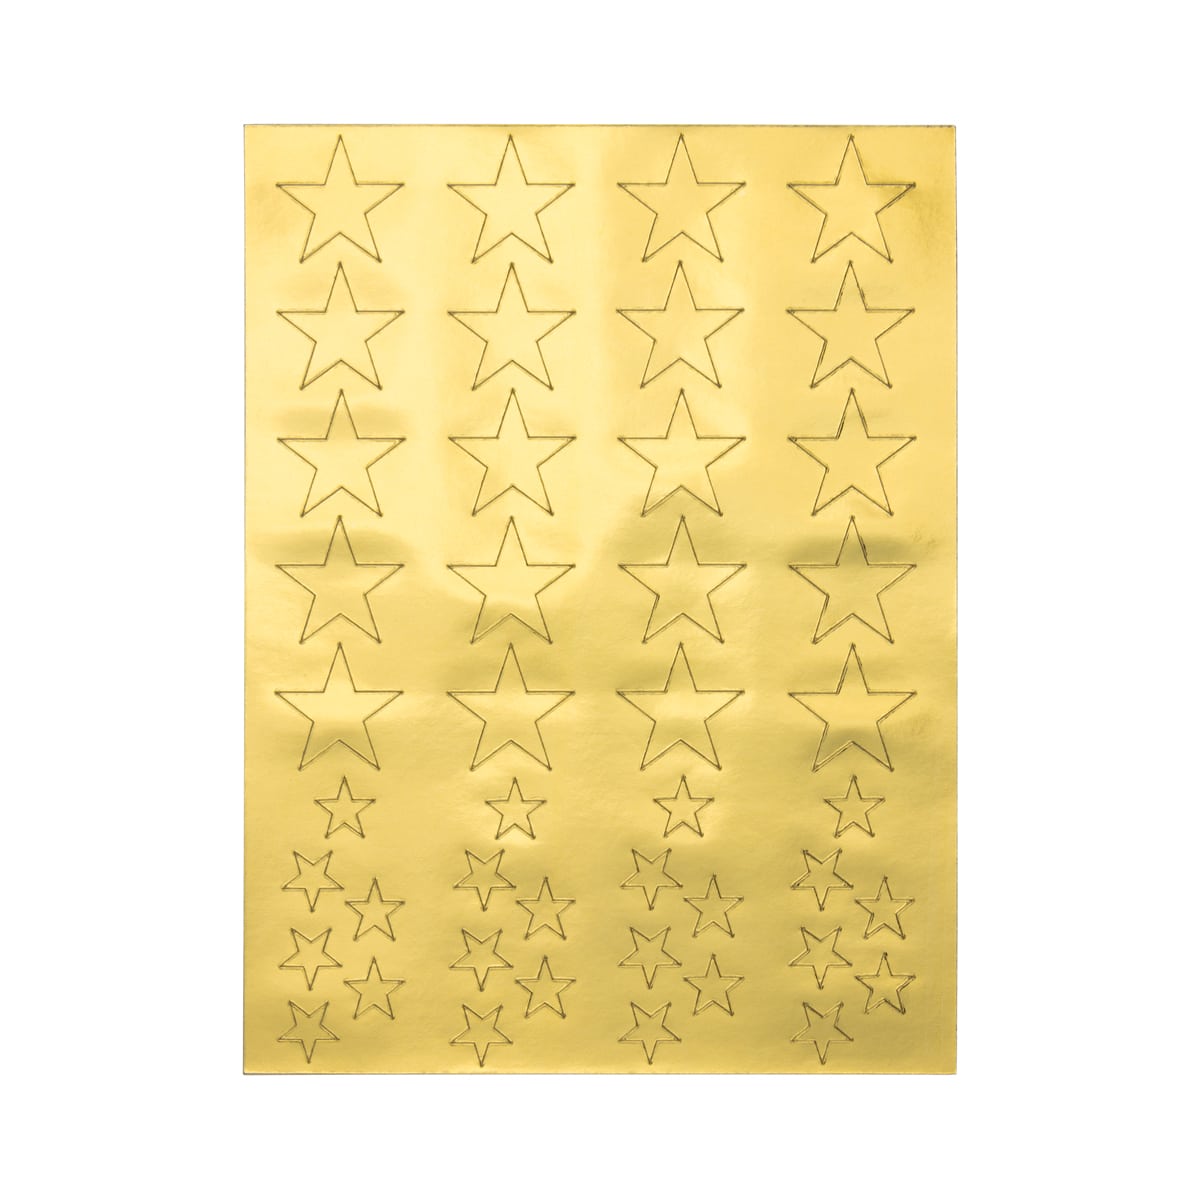 Gold Star Stickers